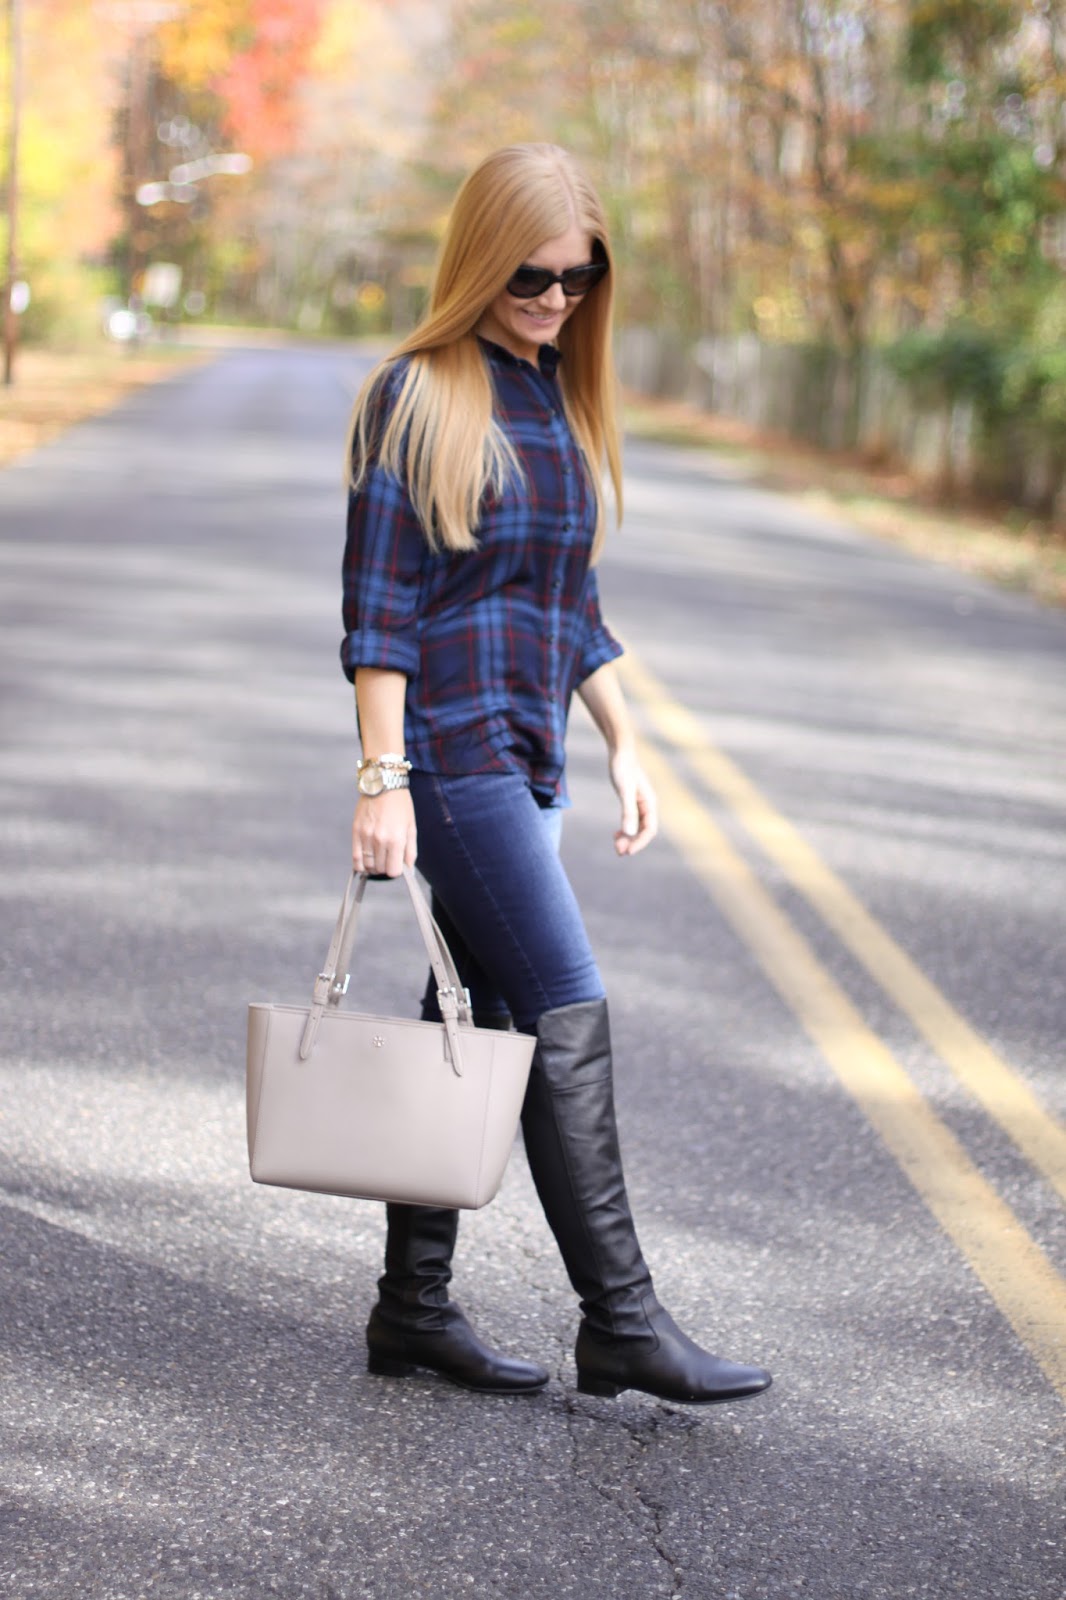 Shopping Bags and Travel Bags: Dressing Up a Plaid